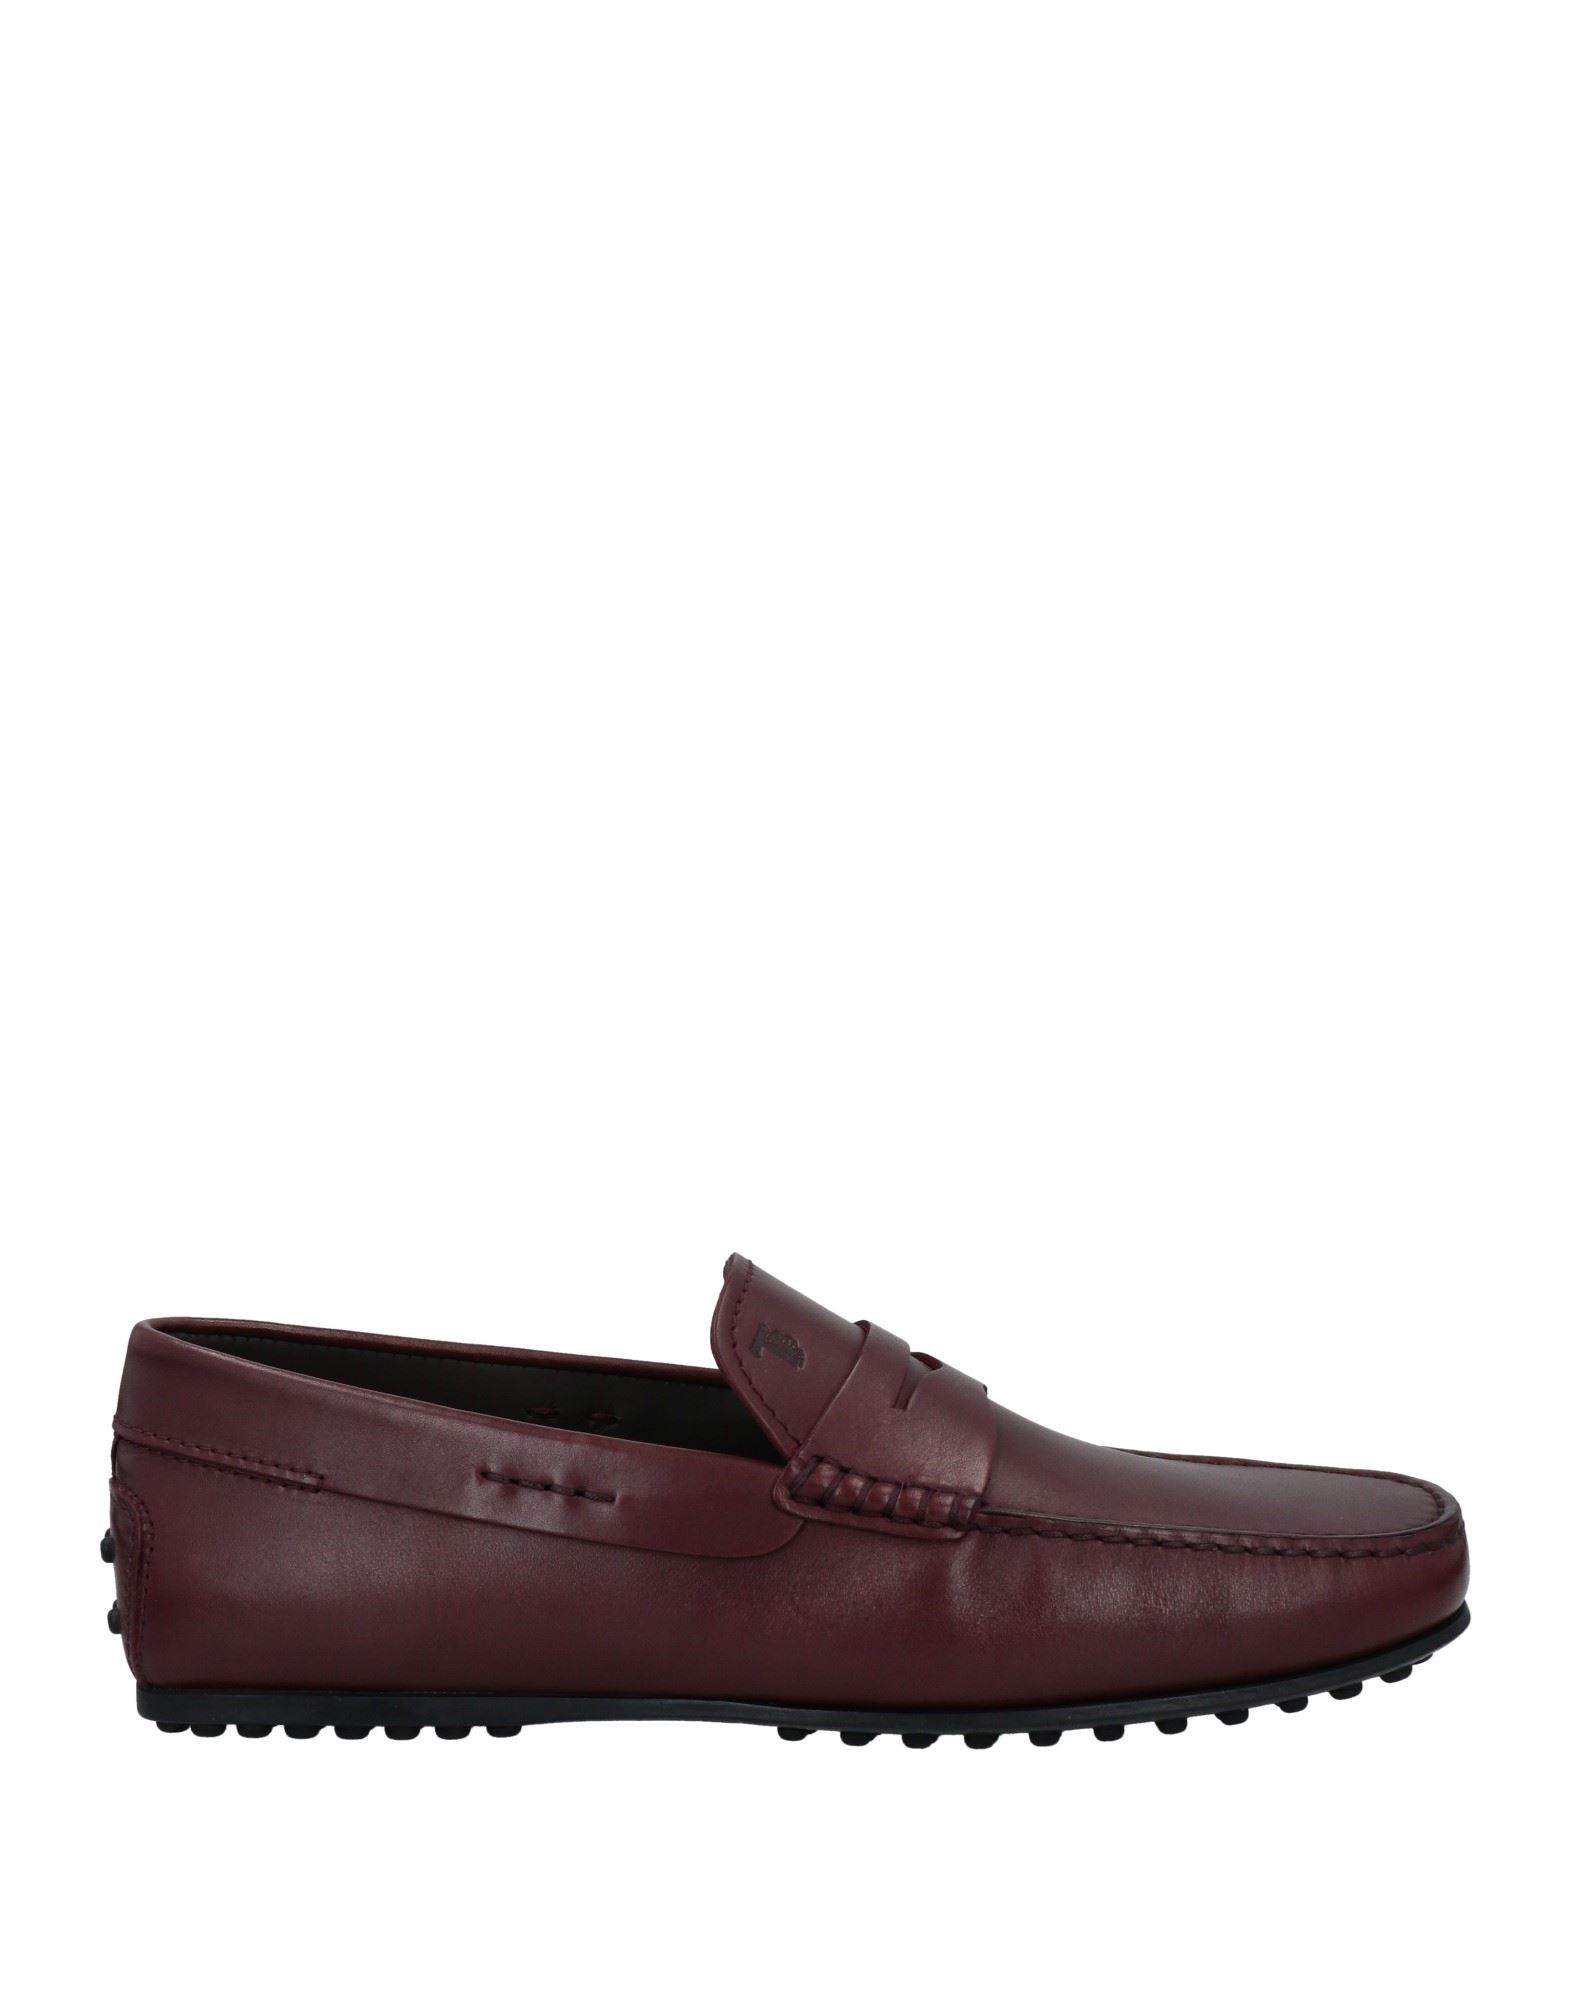 TOD'S TOD'S MAN LOAFERS BURGUNDY SIZE 8 SOFT LEATHER